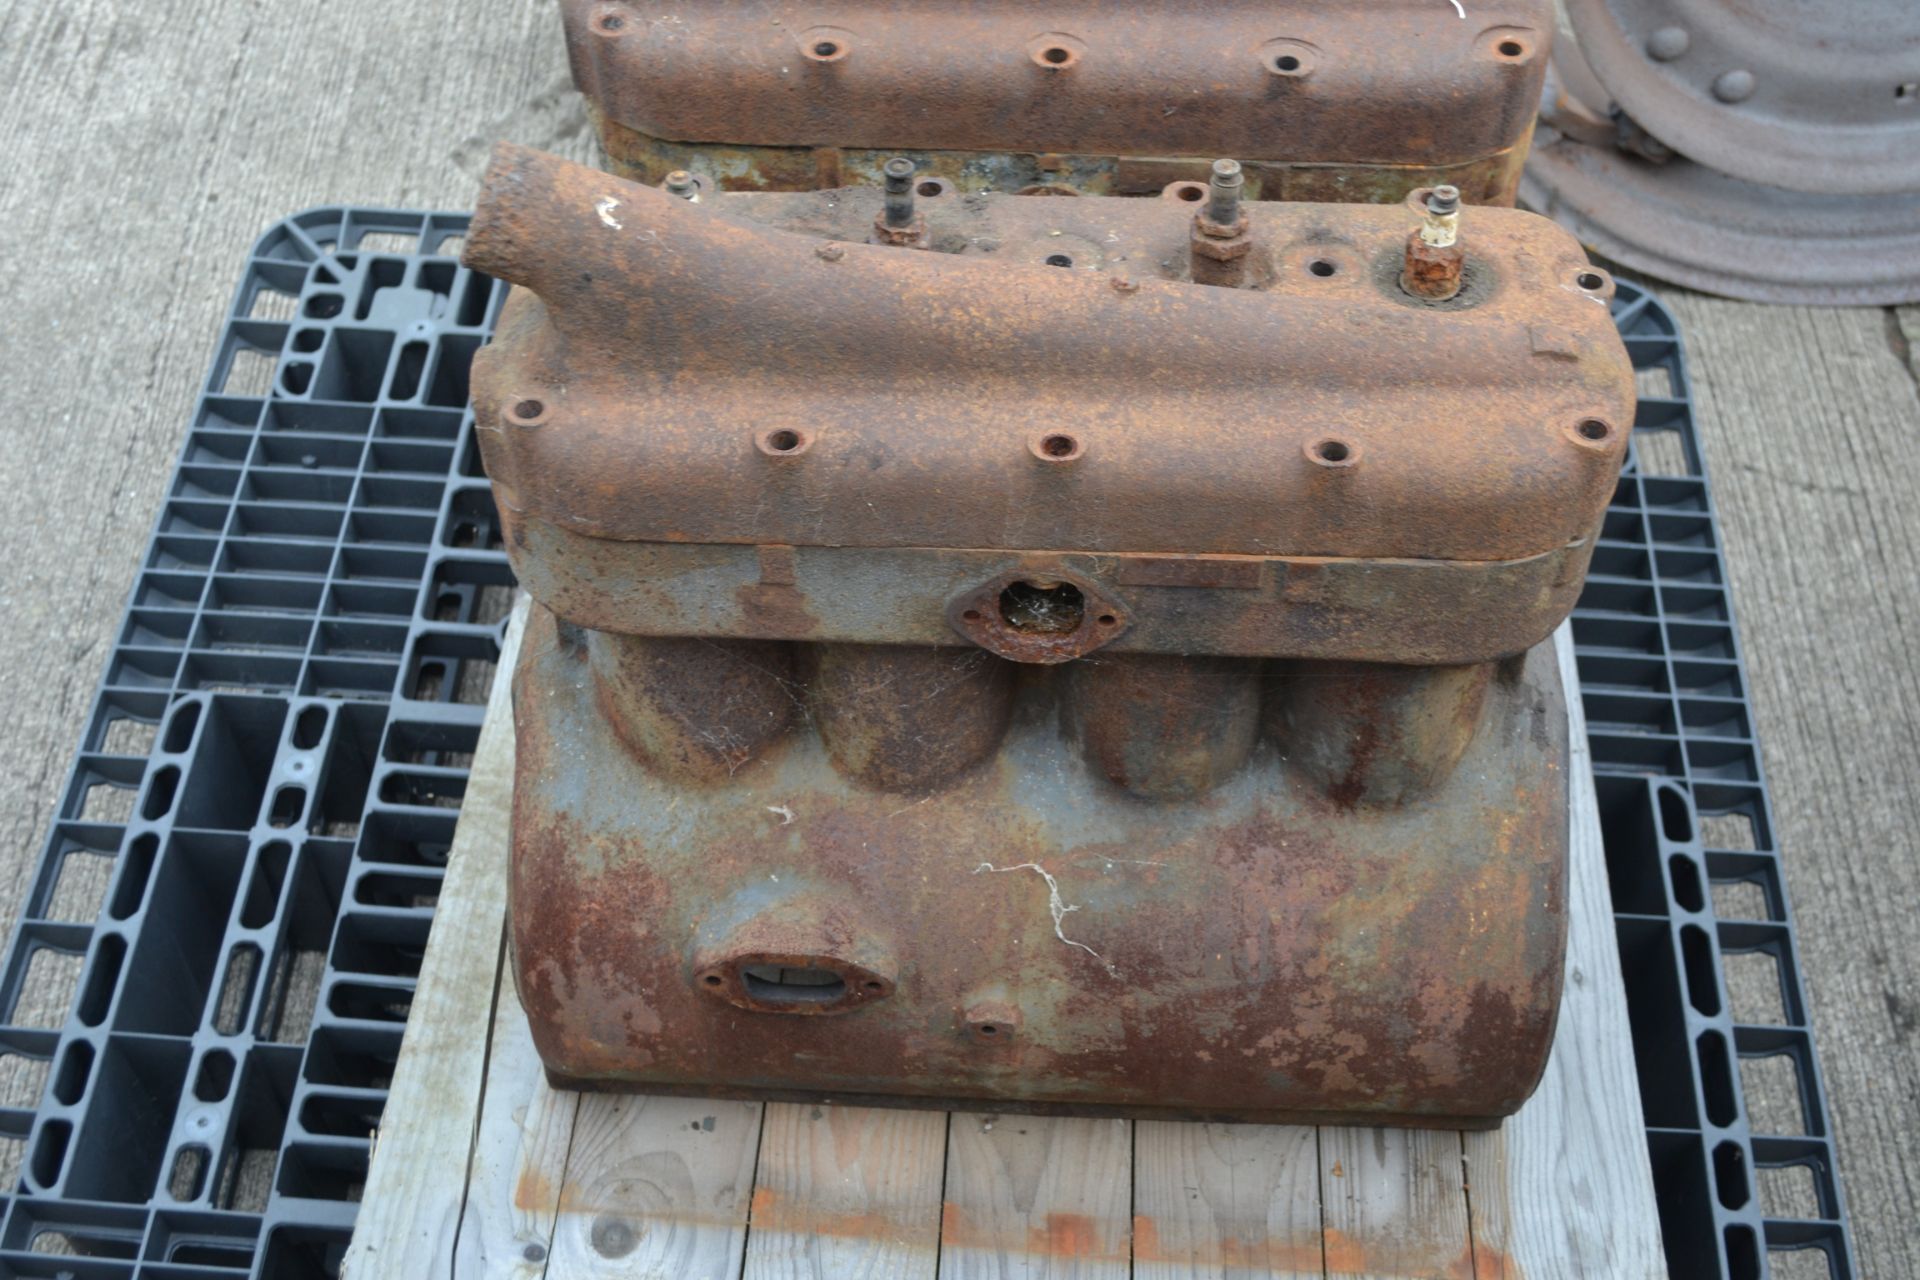 2x Ford Model A engine blocks. - Image 7 of 8